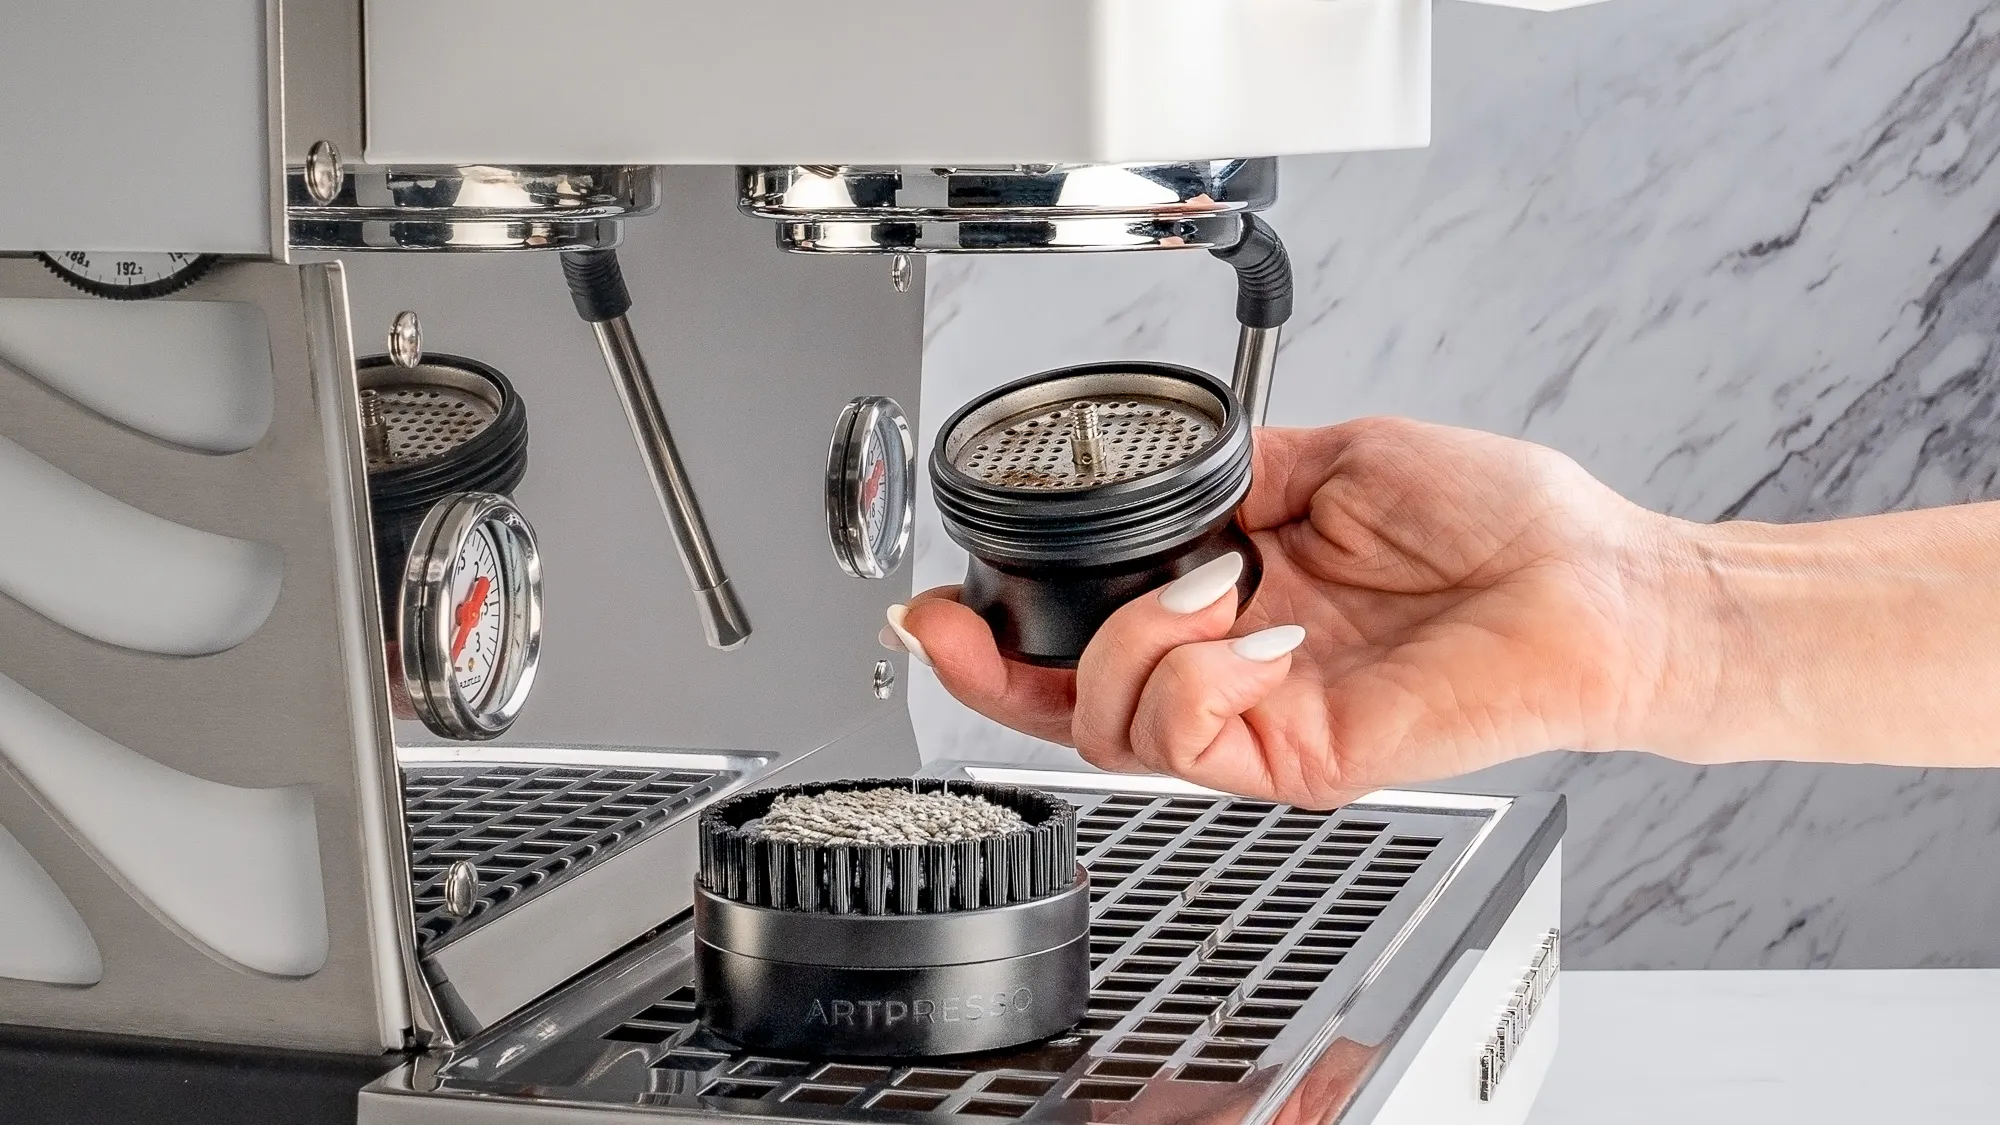 How To Clean Breville Espresso Machine - Descale And Backflush Guides